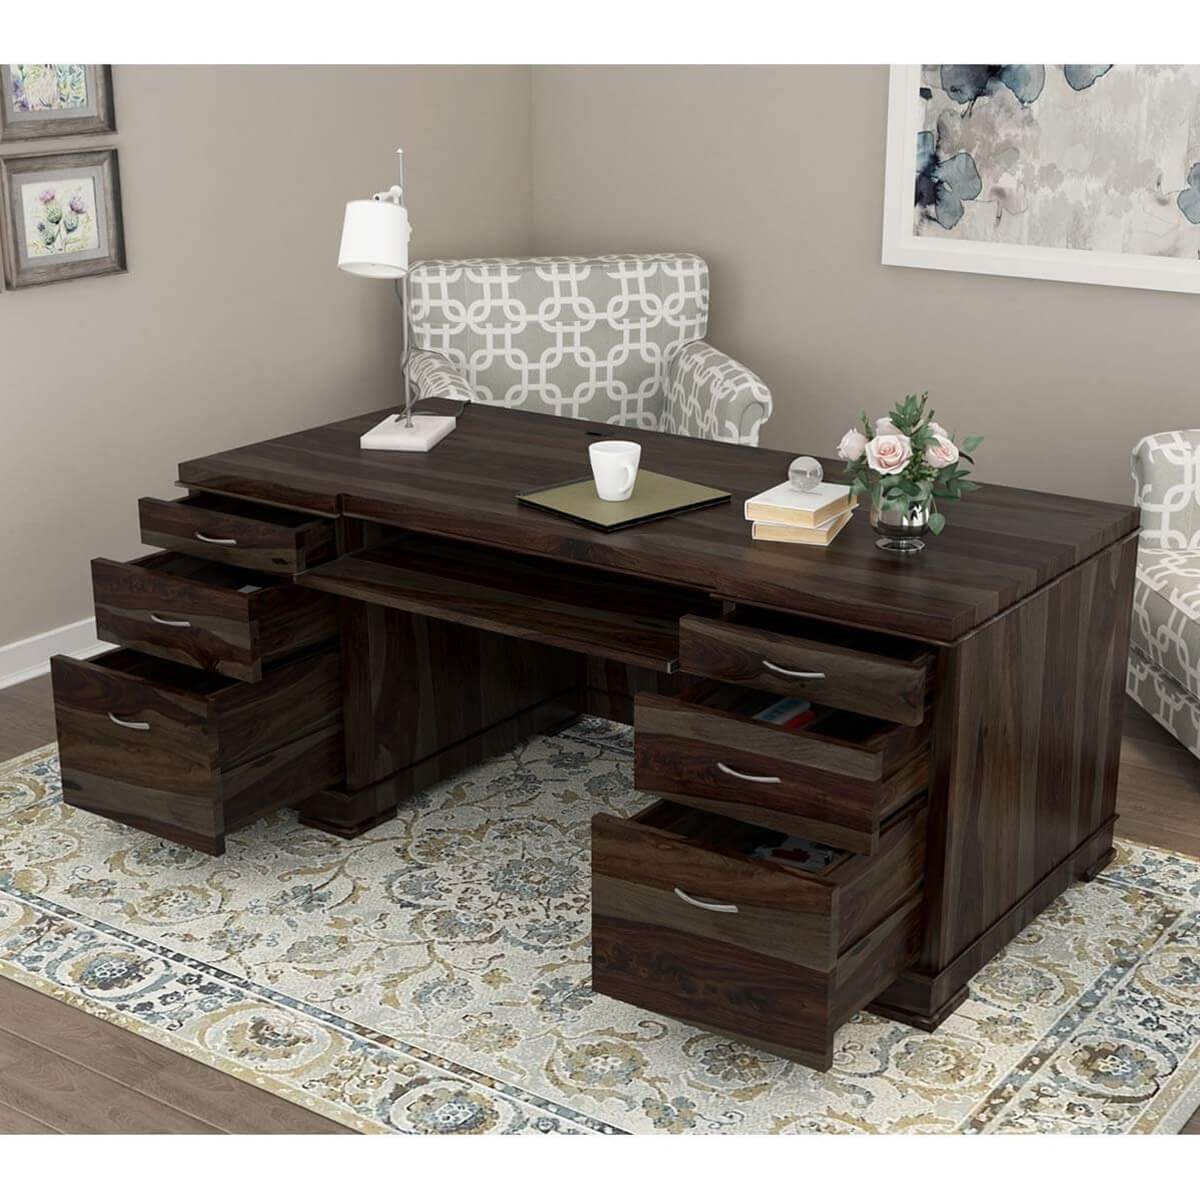 https://www.sierralivingconcepts.com/images/thumbs/0398199_blanford-rustic-solid-wood-home-office-executive-desk-w-file-cabinets.jpeg